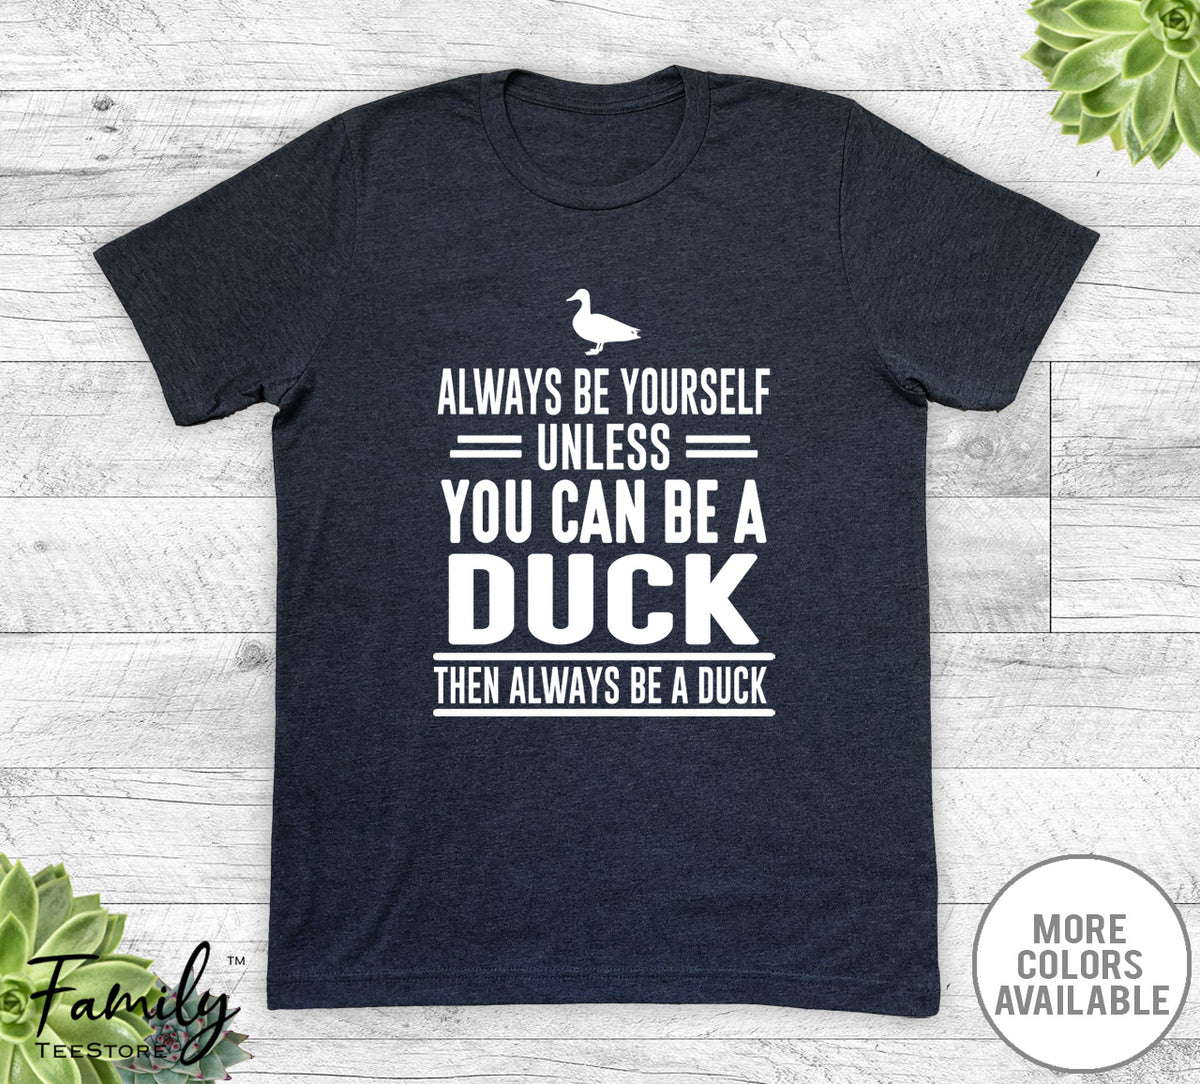 Always Be Yourself Unless You Can Be A Duck - Unisex T-shirt - Duck Shirt - Duck Gift - familyteeprints